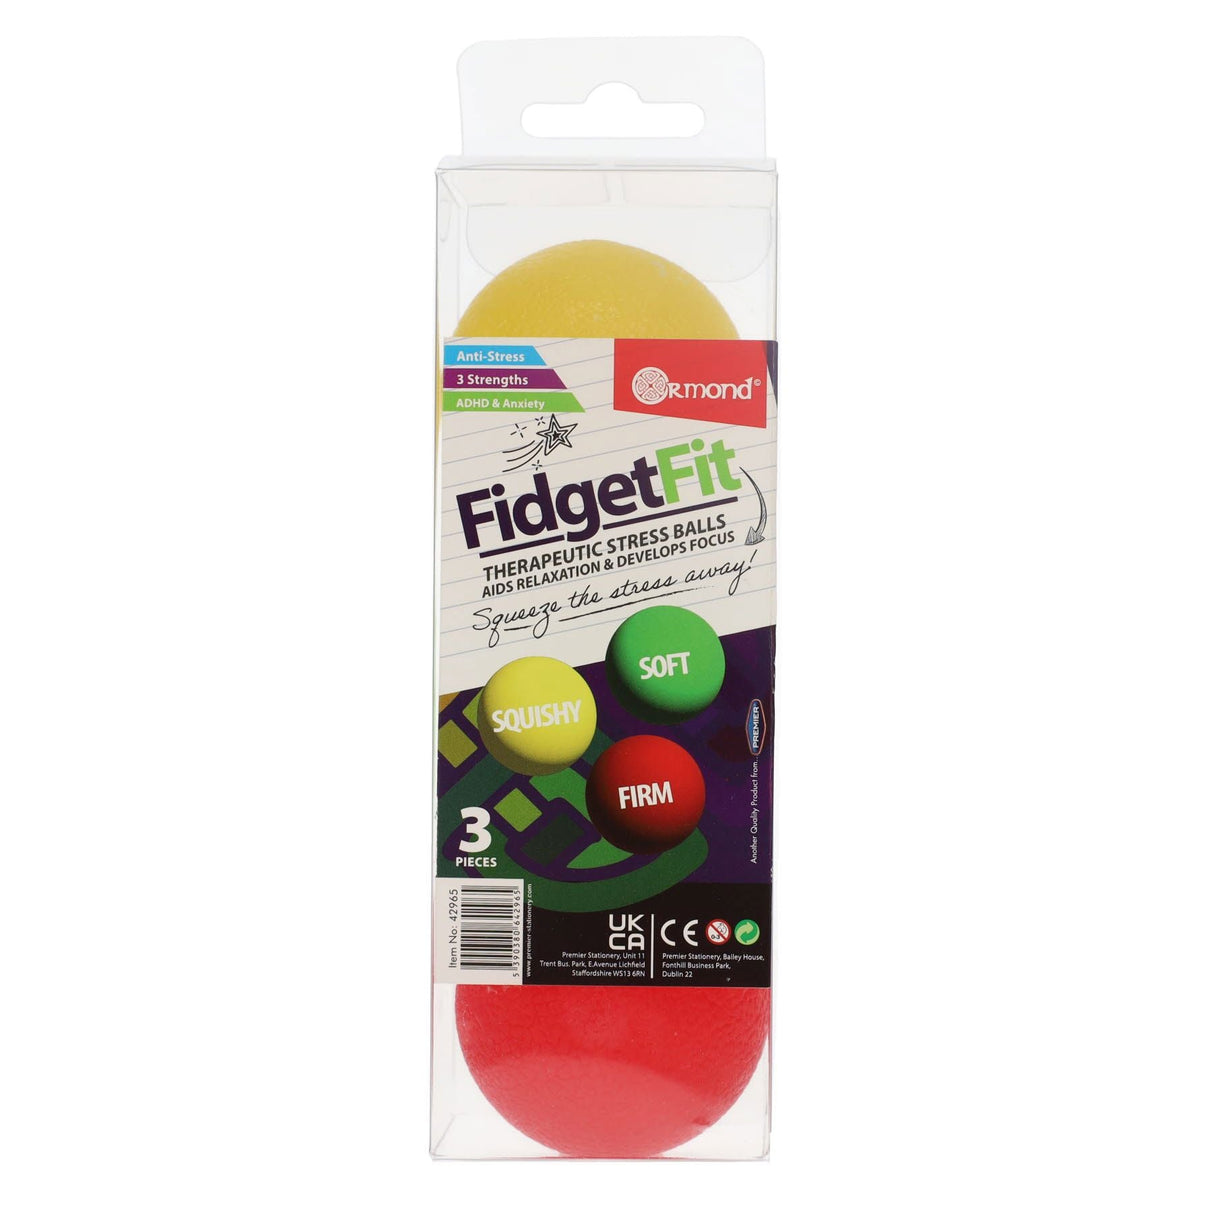 Ormond Fidget Fit Therapeutic Stress Balls - Pack of 3 | Stationery Shop UK